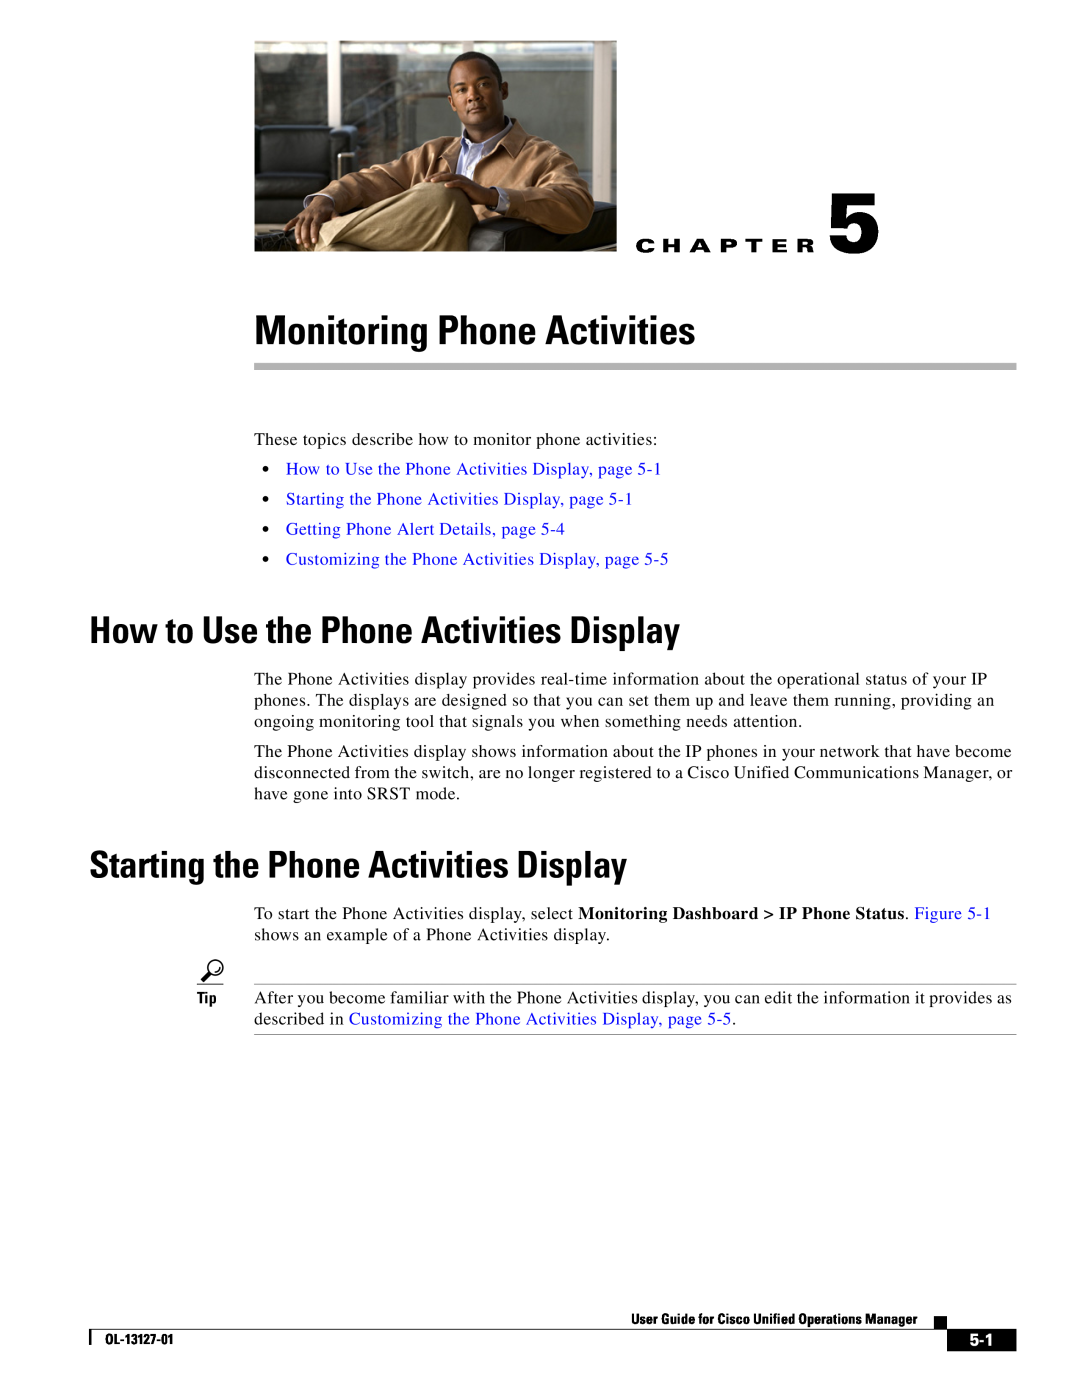 Cisco Systems OL-13127-01 manual How to Use the Phone Activities Display, Starting the Phone Activities Display 